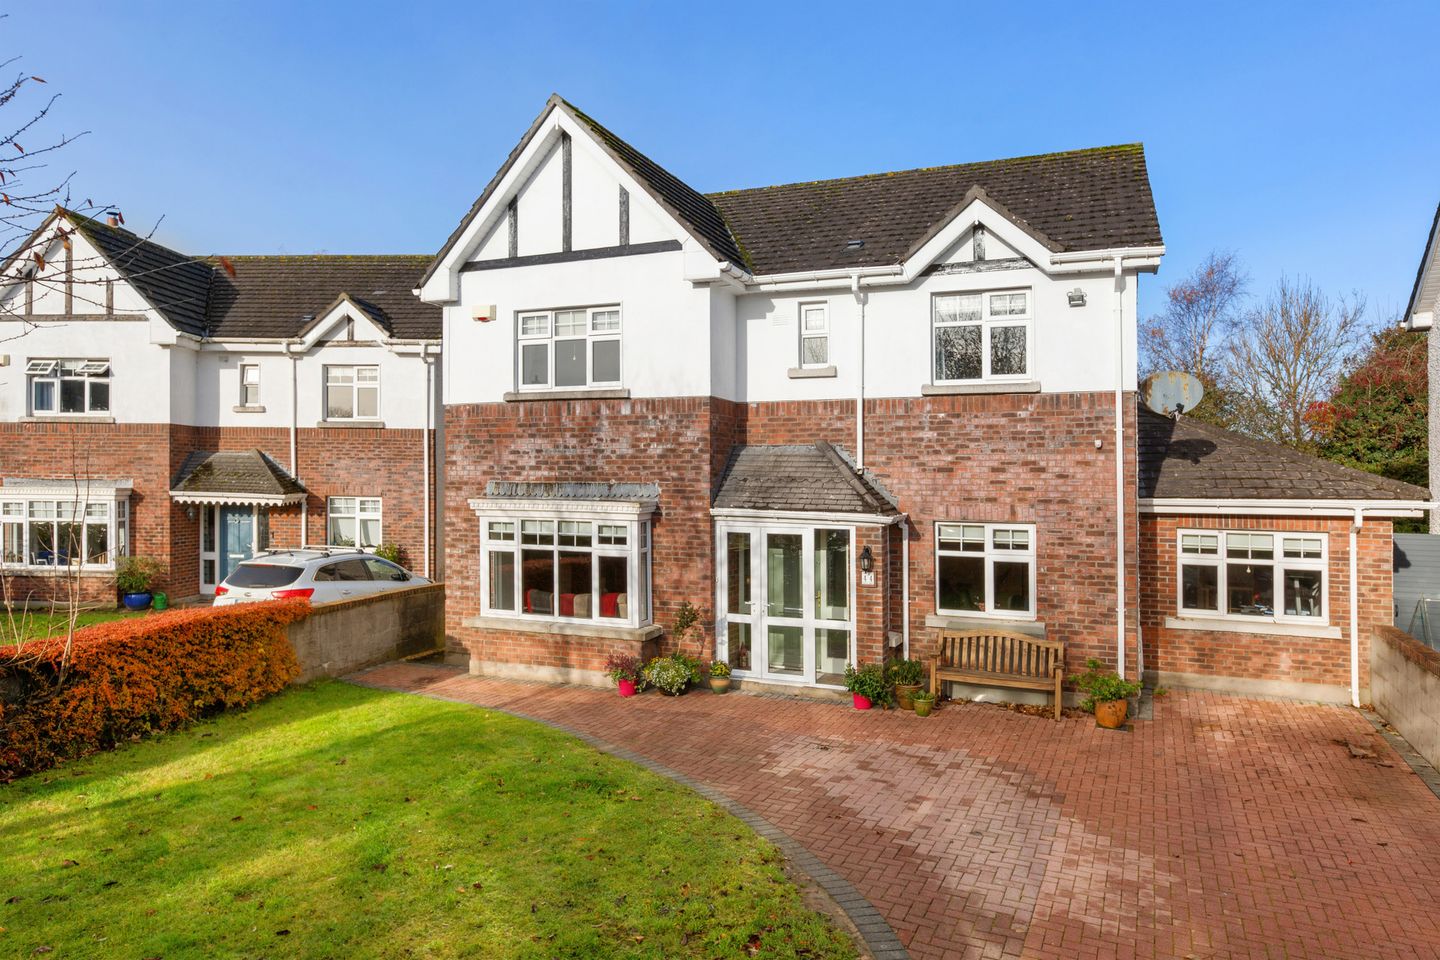 44 Parsons Hall, Maynooth, Co. Kildare, W23D6D9